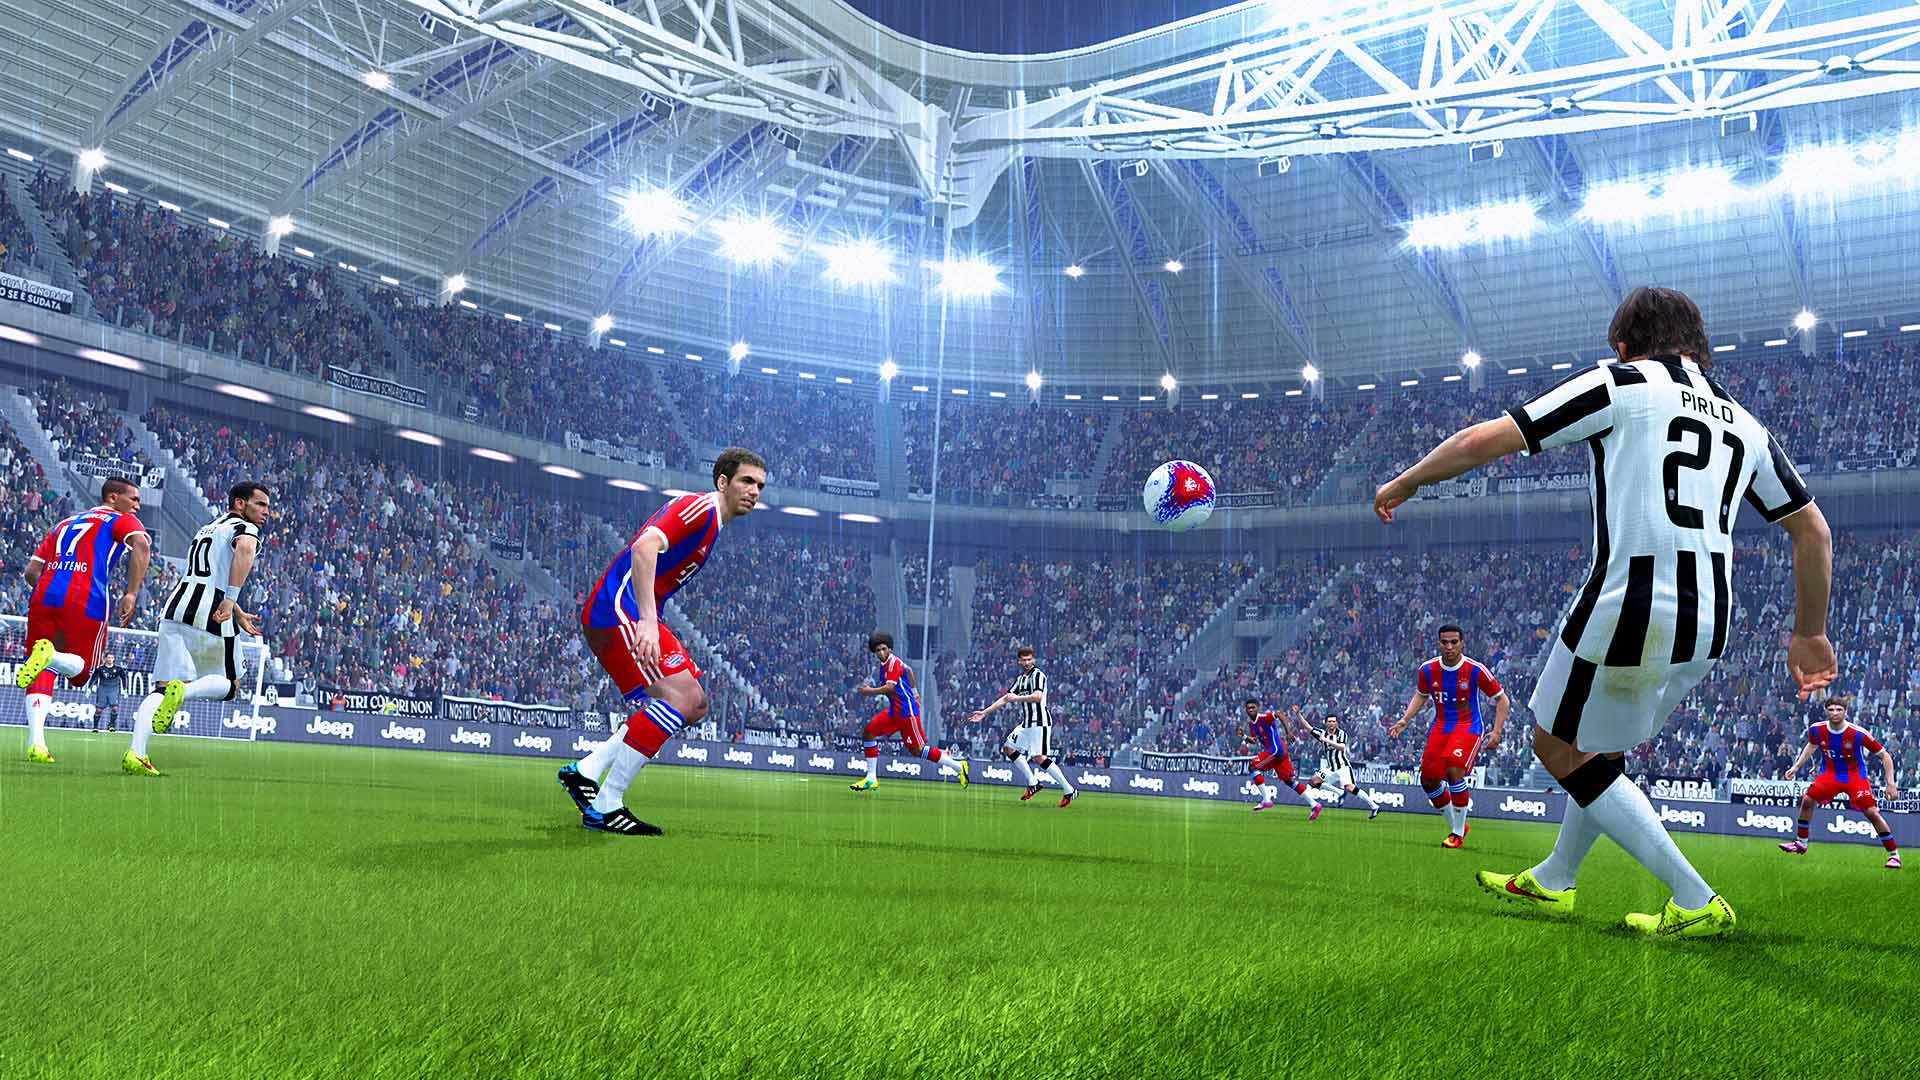 Top game win. World Soccer winning Eleven 2014. PES 2015. Pro Evolution Soccer 2015. Pro Evolution Soccer 2014.